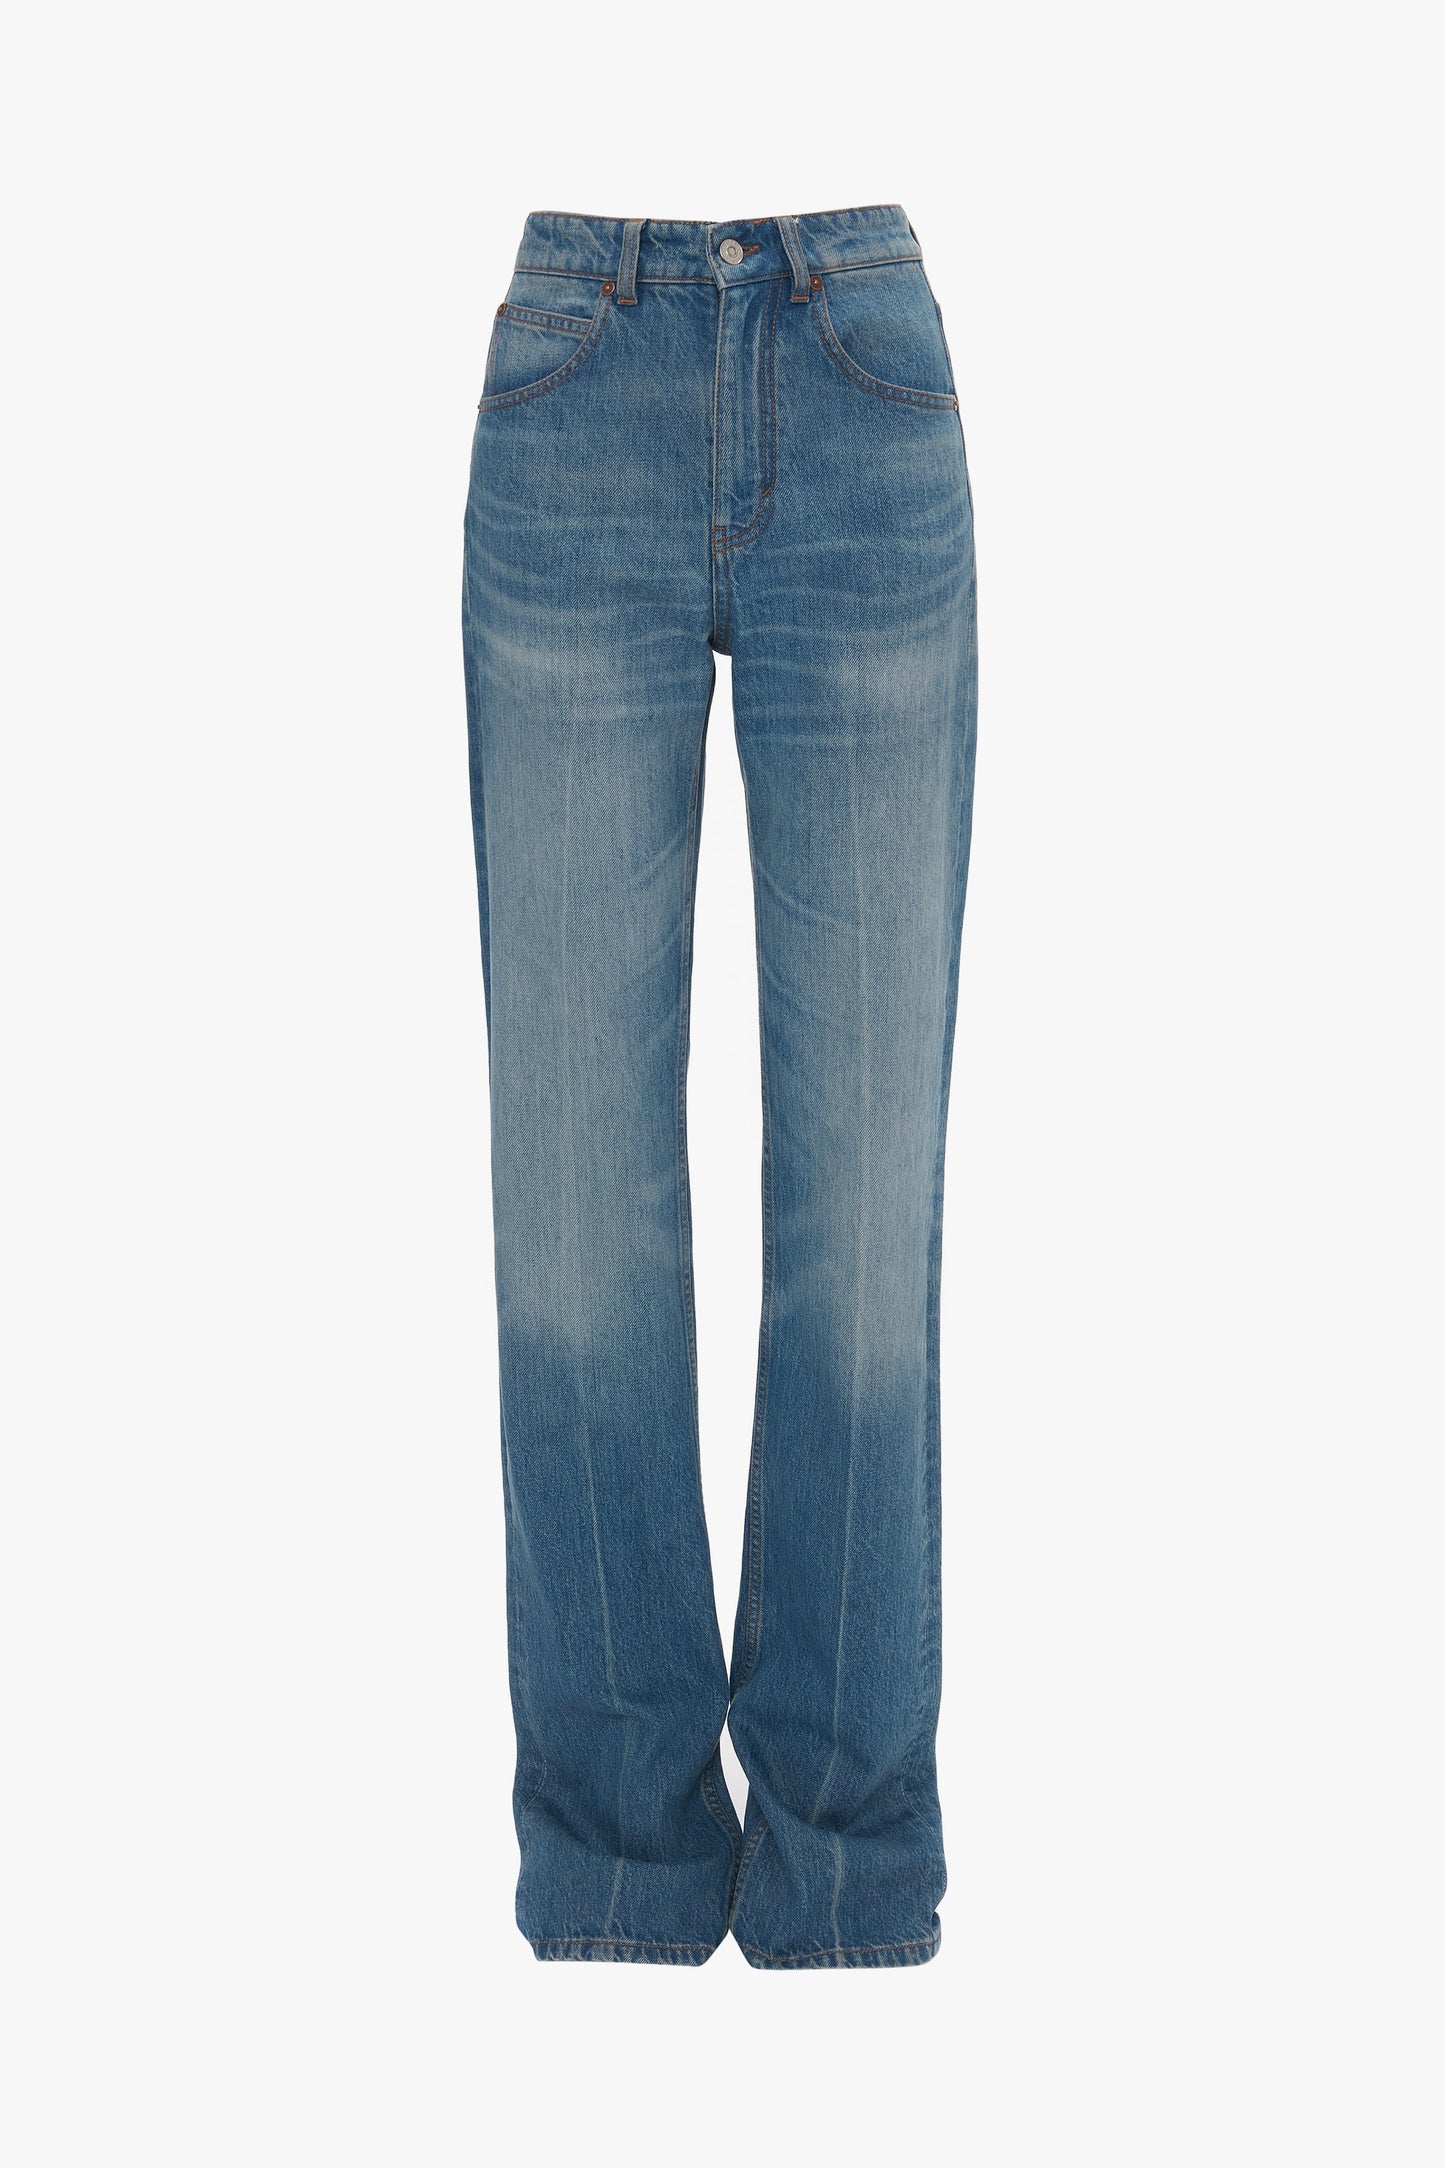 A pair of Julia Jean In Broken Vintage Wash from Victoria Beckham, blue, high-waisted, wide-leg jeans made from 100% cotton denim with slight fading on the thighs and a single button and zipper closure.